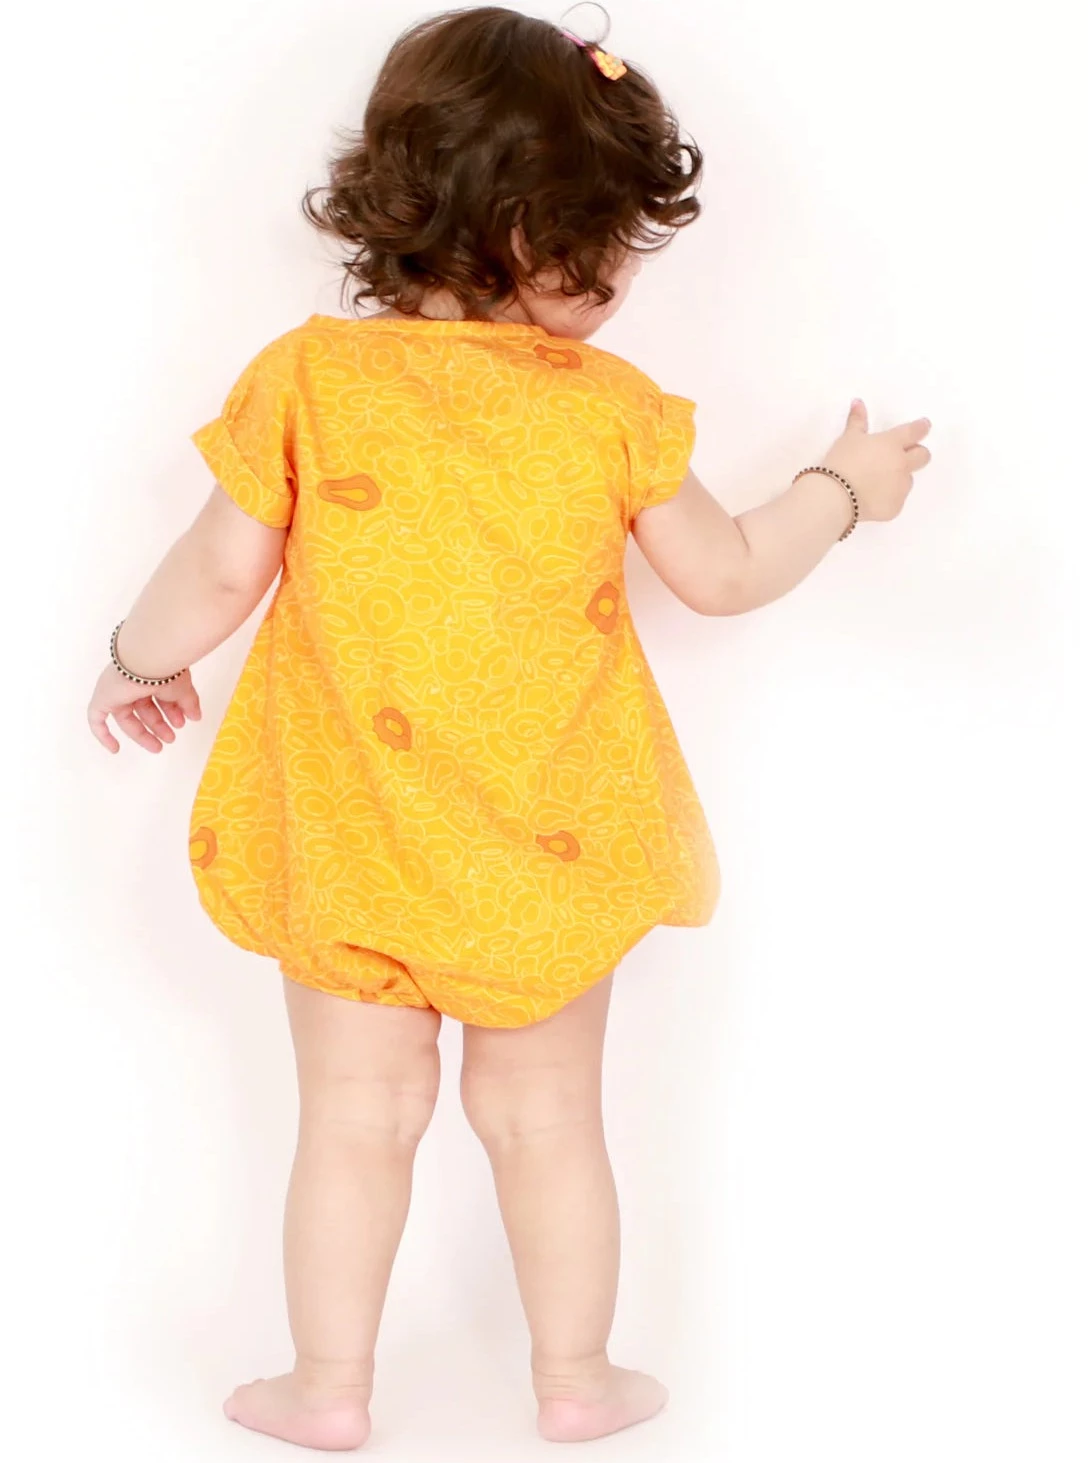 MIKO LOLO Dawn Floater Unisex Onesie in Organic Cotton | kids Fashion | The Green Collective SG